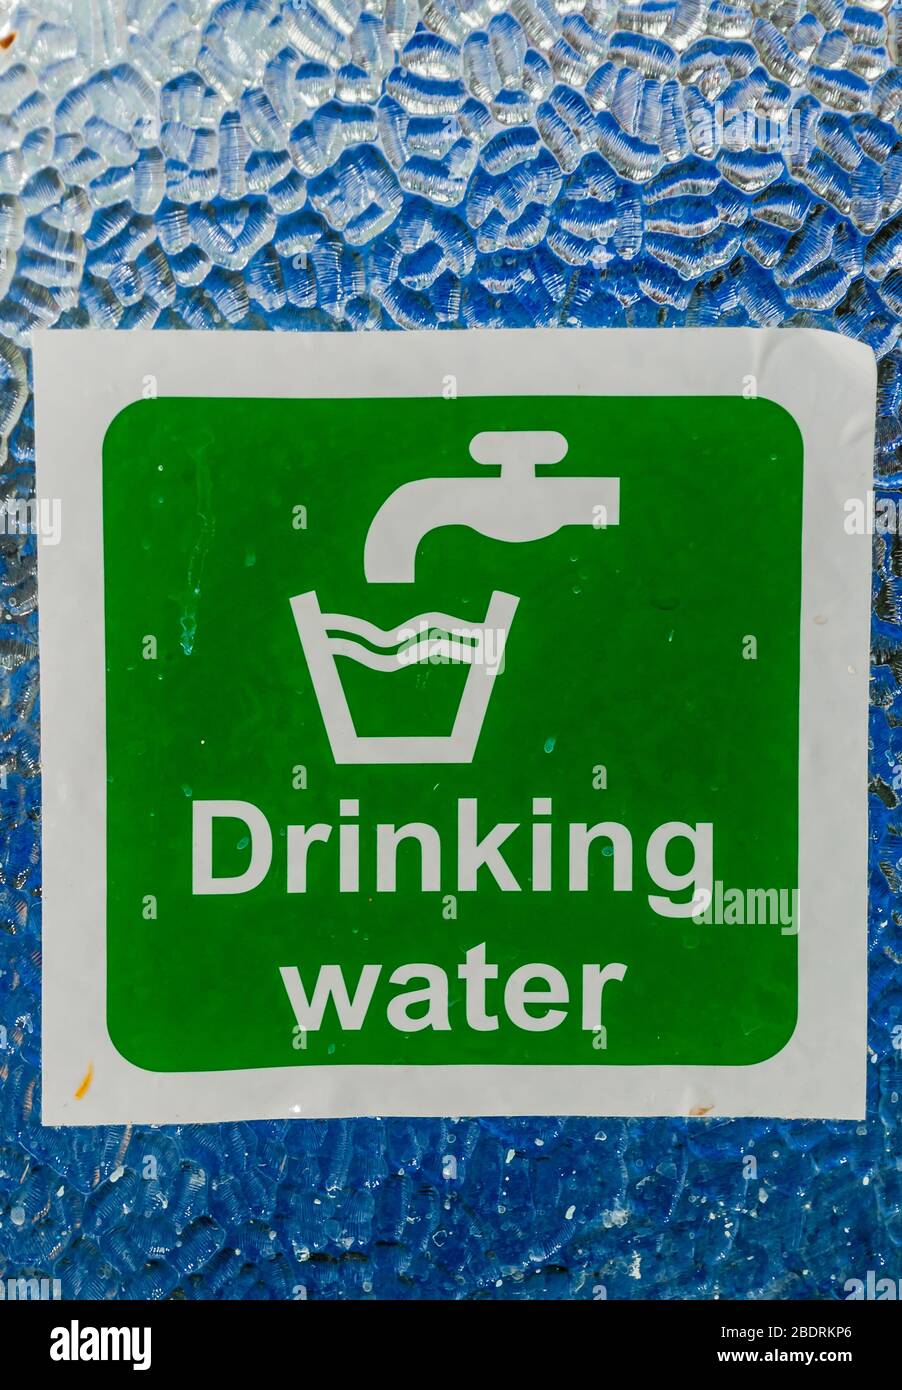 Drinking water sign with white text and tap faucet symbol and glass symbol on green background on glass window. Stock Photo